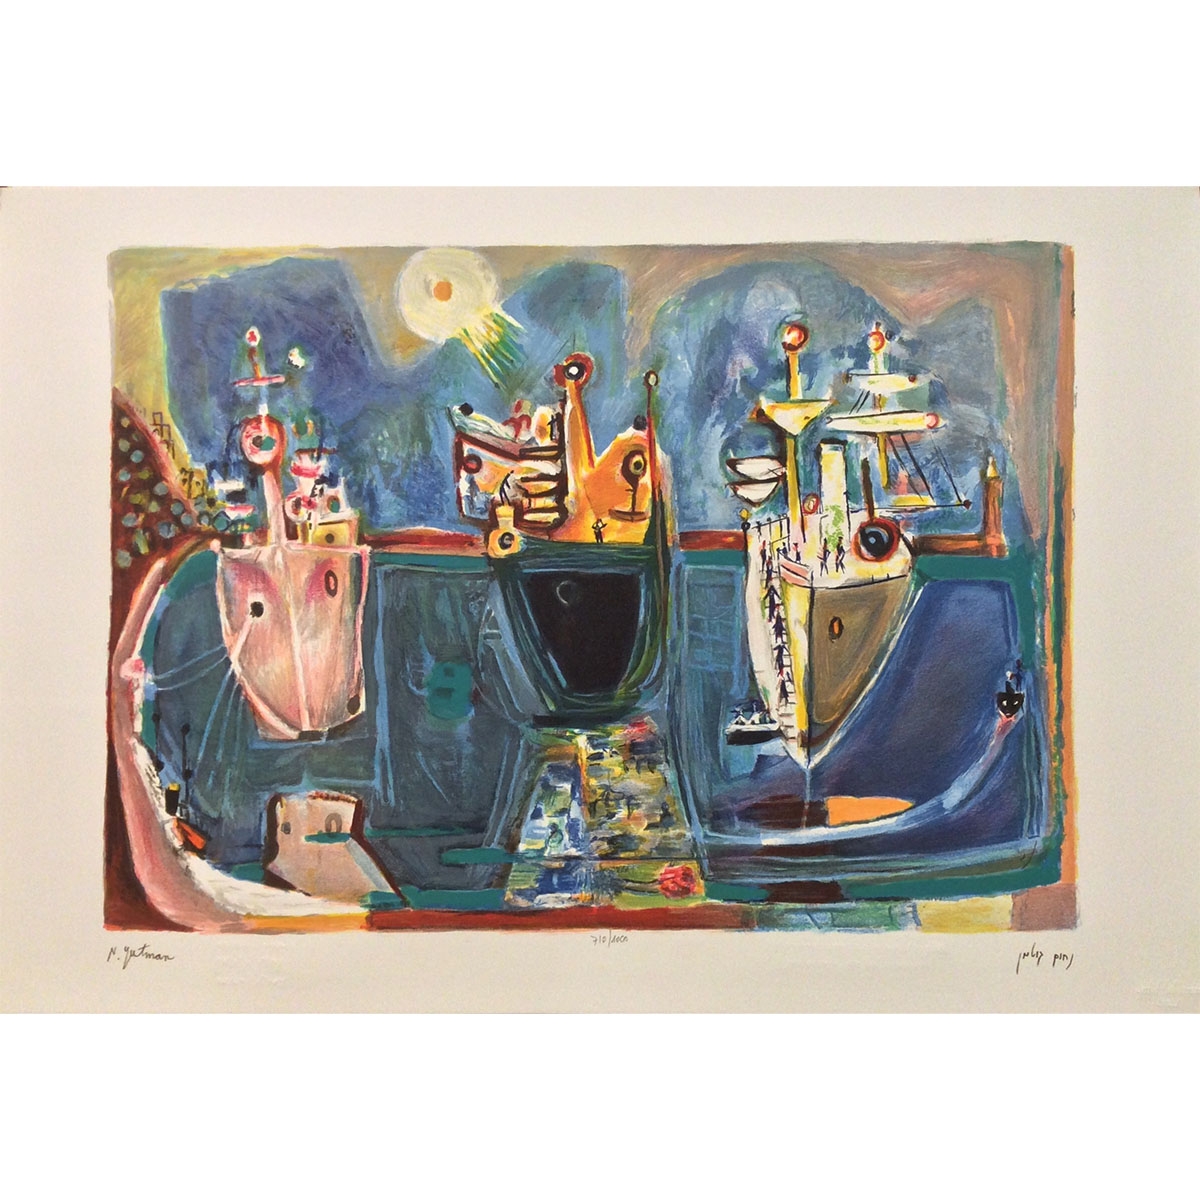  Ships at Shore. Artist: Nahum Gutman. Signed & Numbered Limited Edition Lithograph - 1